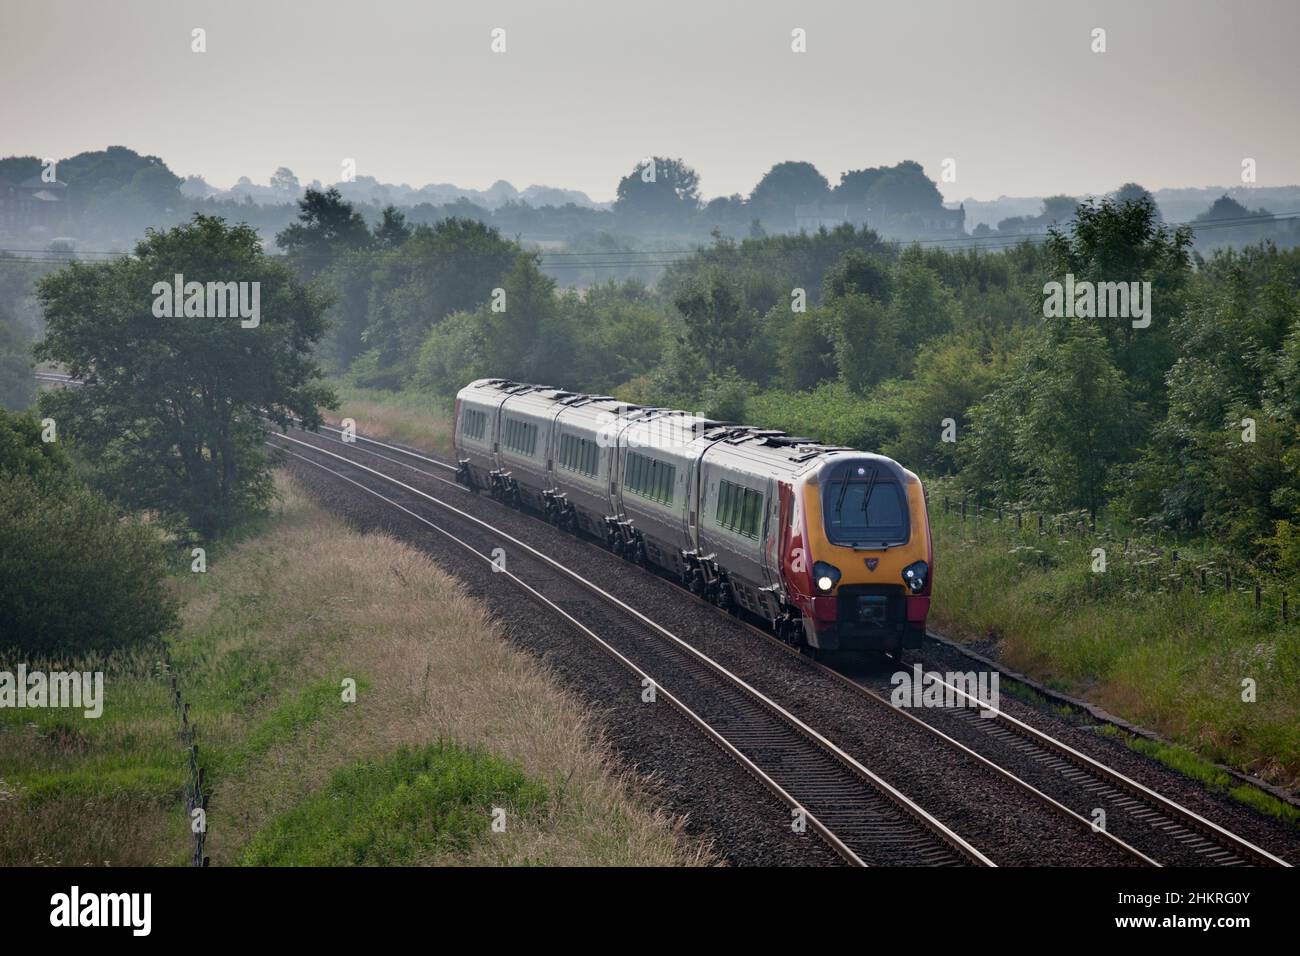 Virgin Trains class 221 bombardier diesel voyager train 221114 passing Lostock, Lancashire with a train diverted due to engineering work Stock Photo